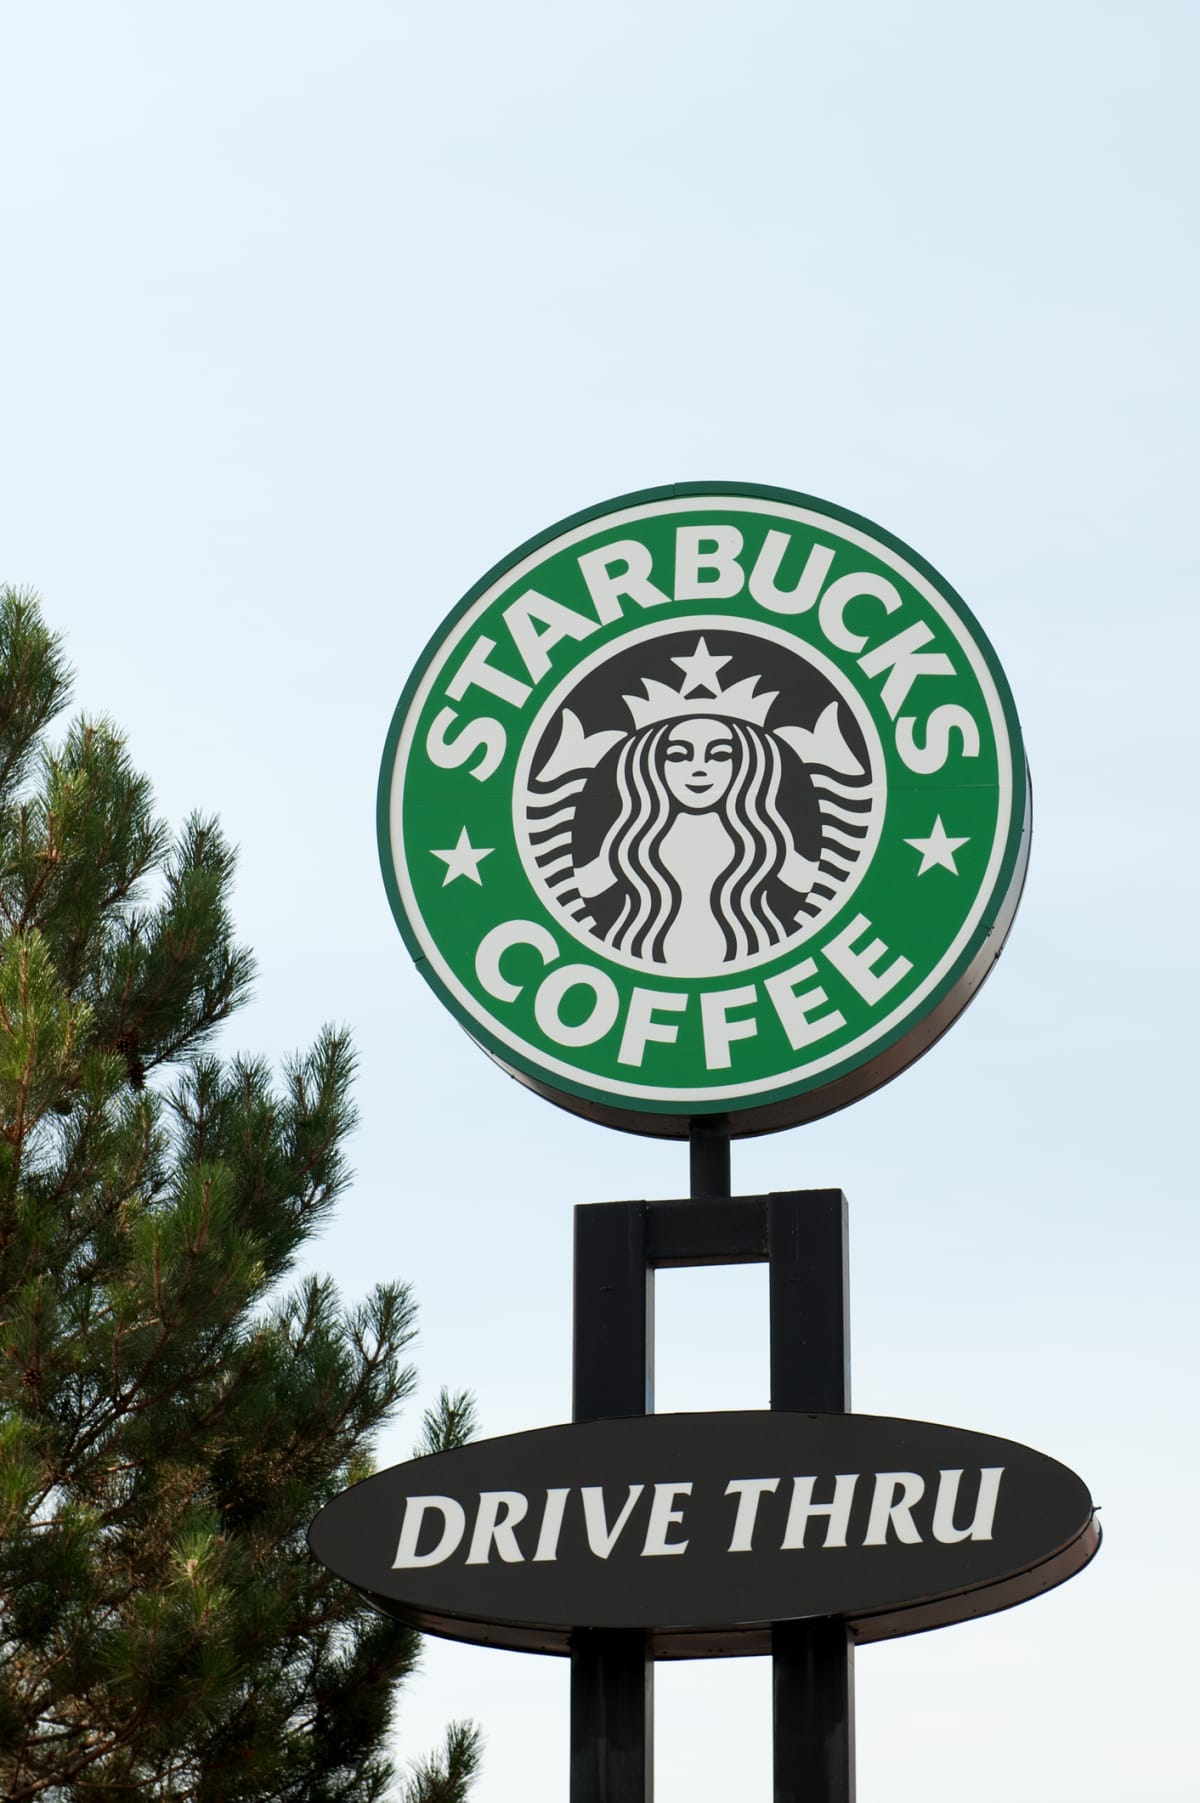 Albuquerqe, New Mexico, USA - July 2, 2011: Drive Thru Starbucks Coffee Sign with Logo in  North East Albuquerque. Starbucks Corporation is an international coffee and coffeehouse chain based in Seattle, Washington. Starbucks sells drip brewed coffee, espresso-based hot drinks, other hot and cold drinks, coffee beans, salads, hot and cold sandwiches and panini, and pastries.